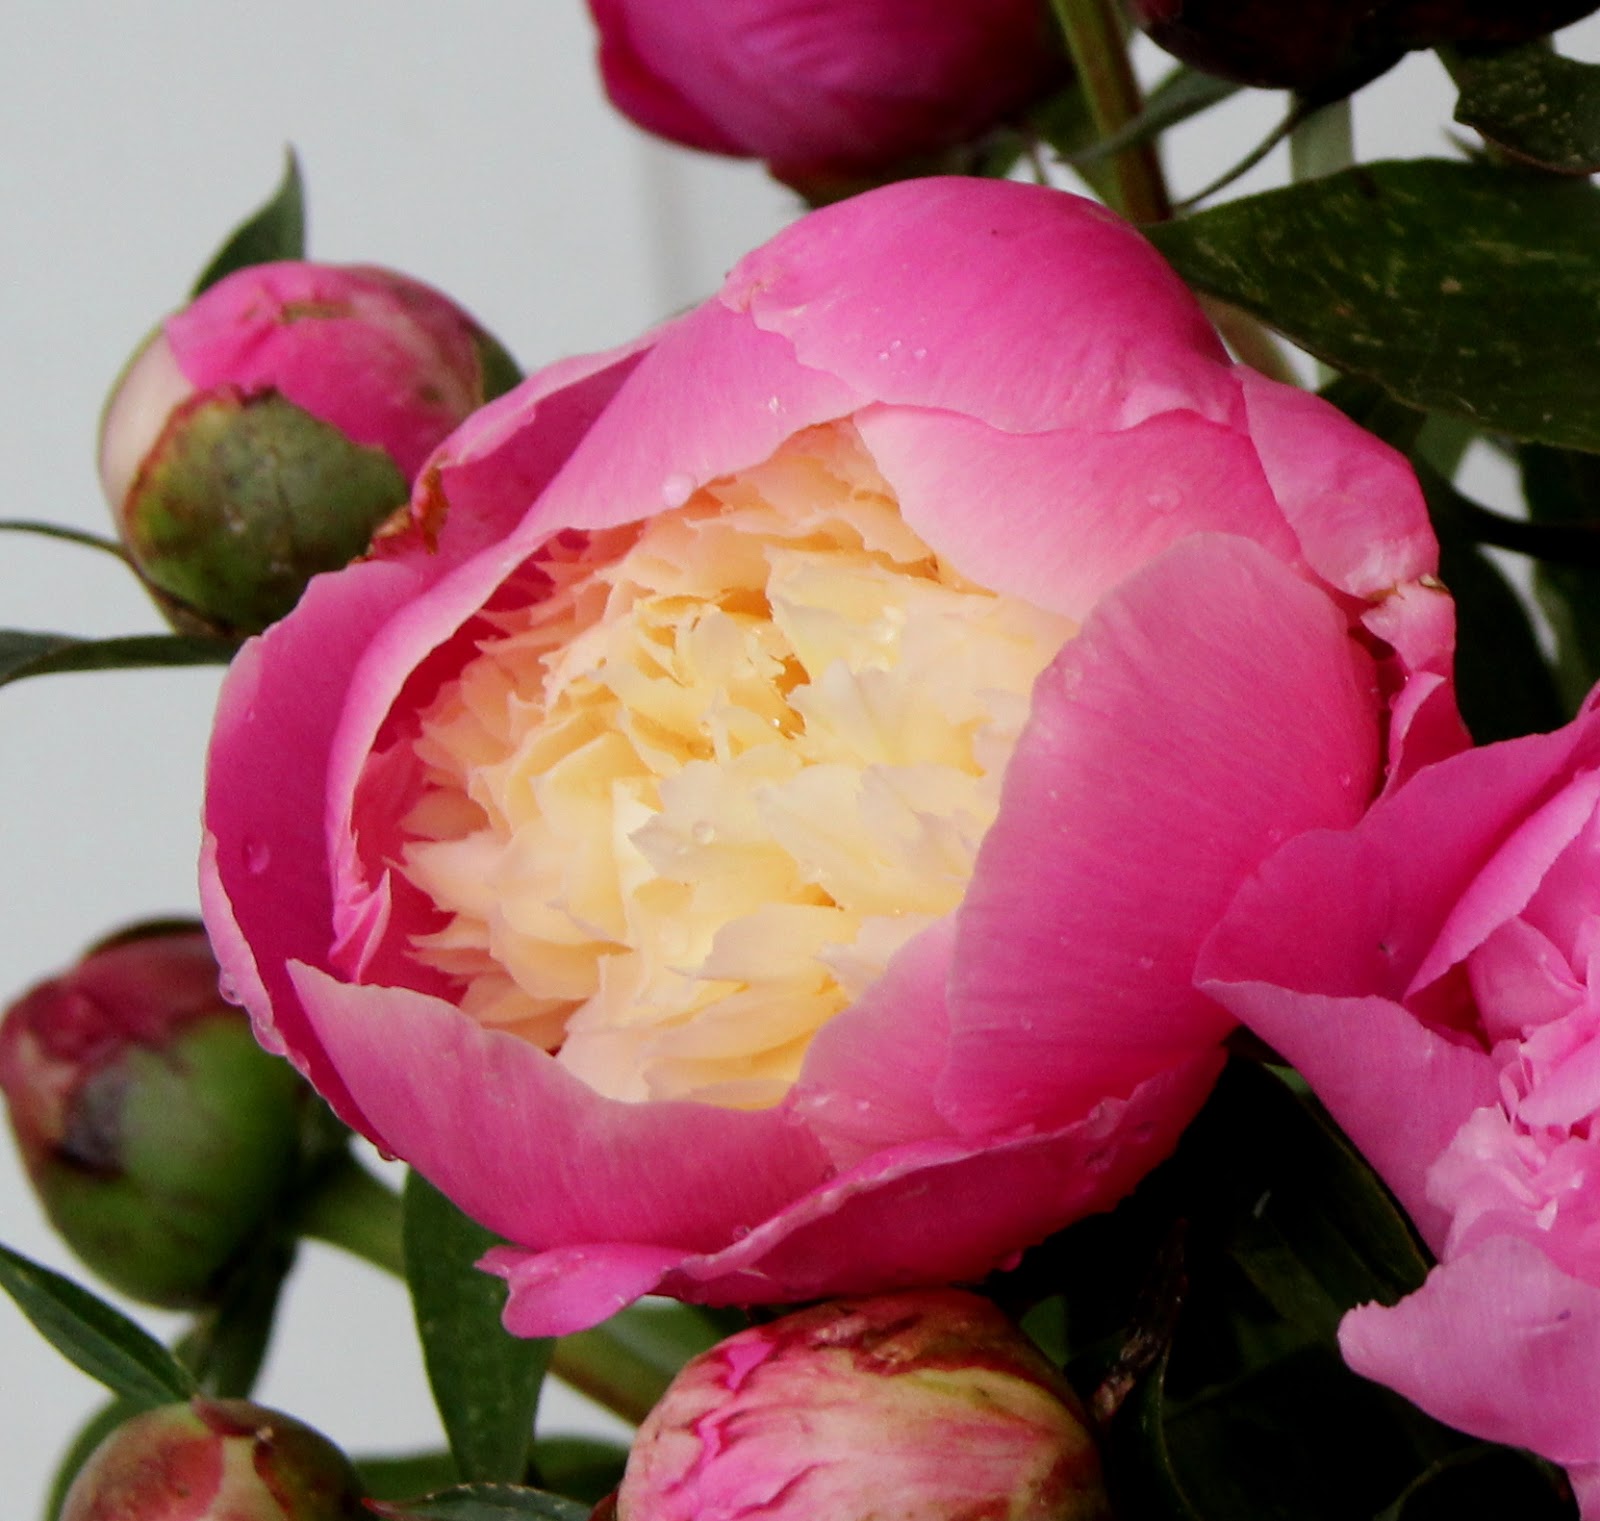 Herbaceous Peonies Tinkled Pink In Spring Arrangements Sowing The Seeds